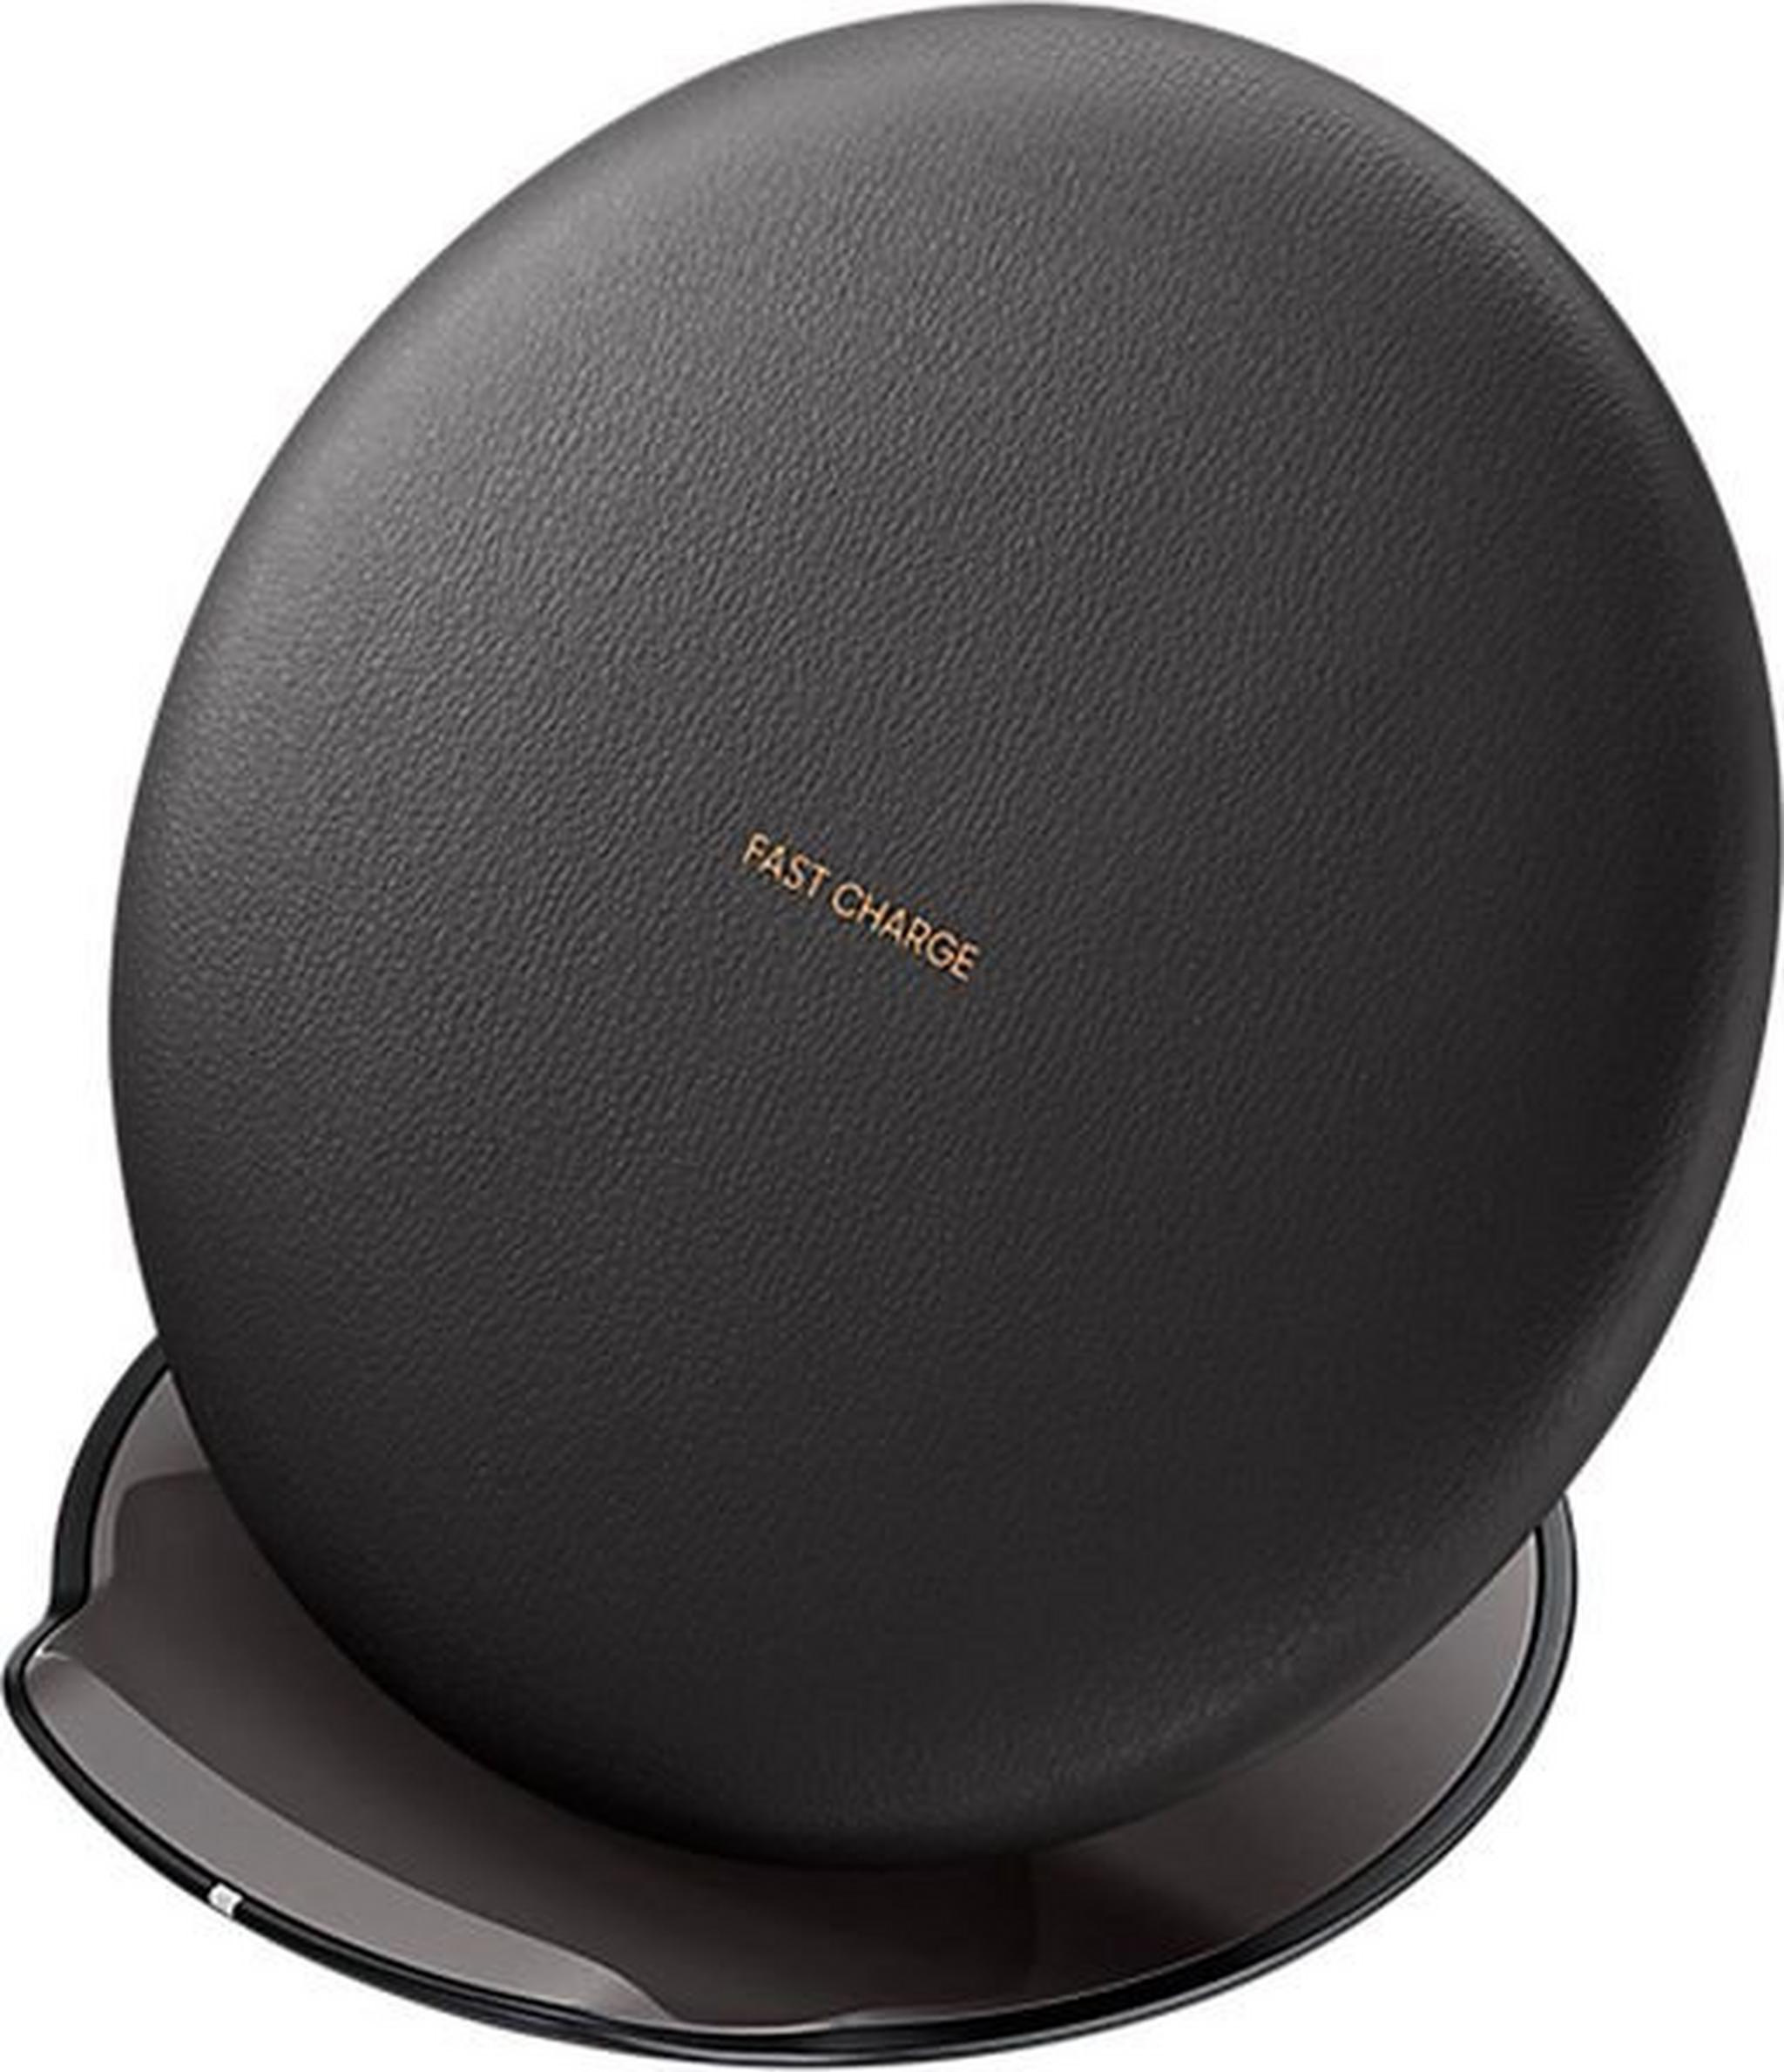 Samsung Wireless Charger Convertible + Travel Adapter For Galaxy S8 And S8+ (EP-PG950TBEGAE) - Black